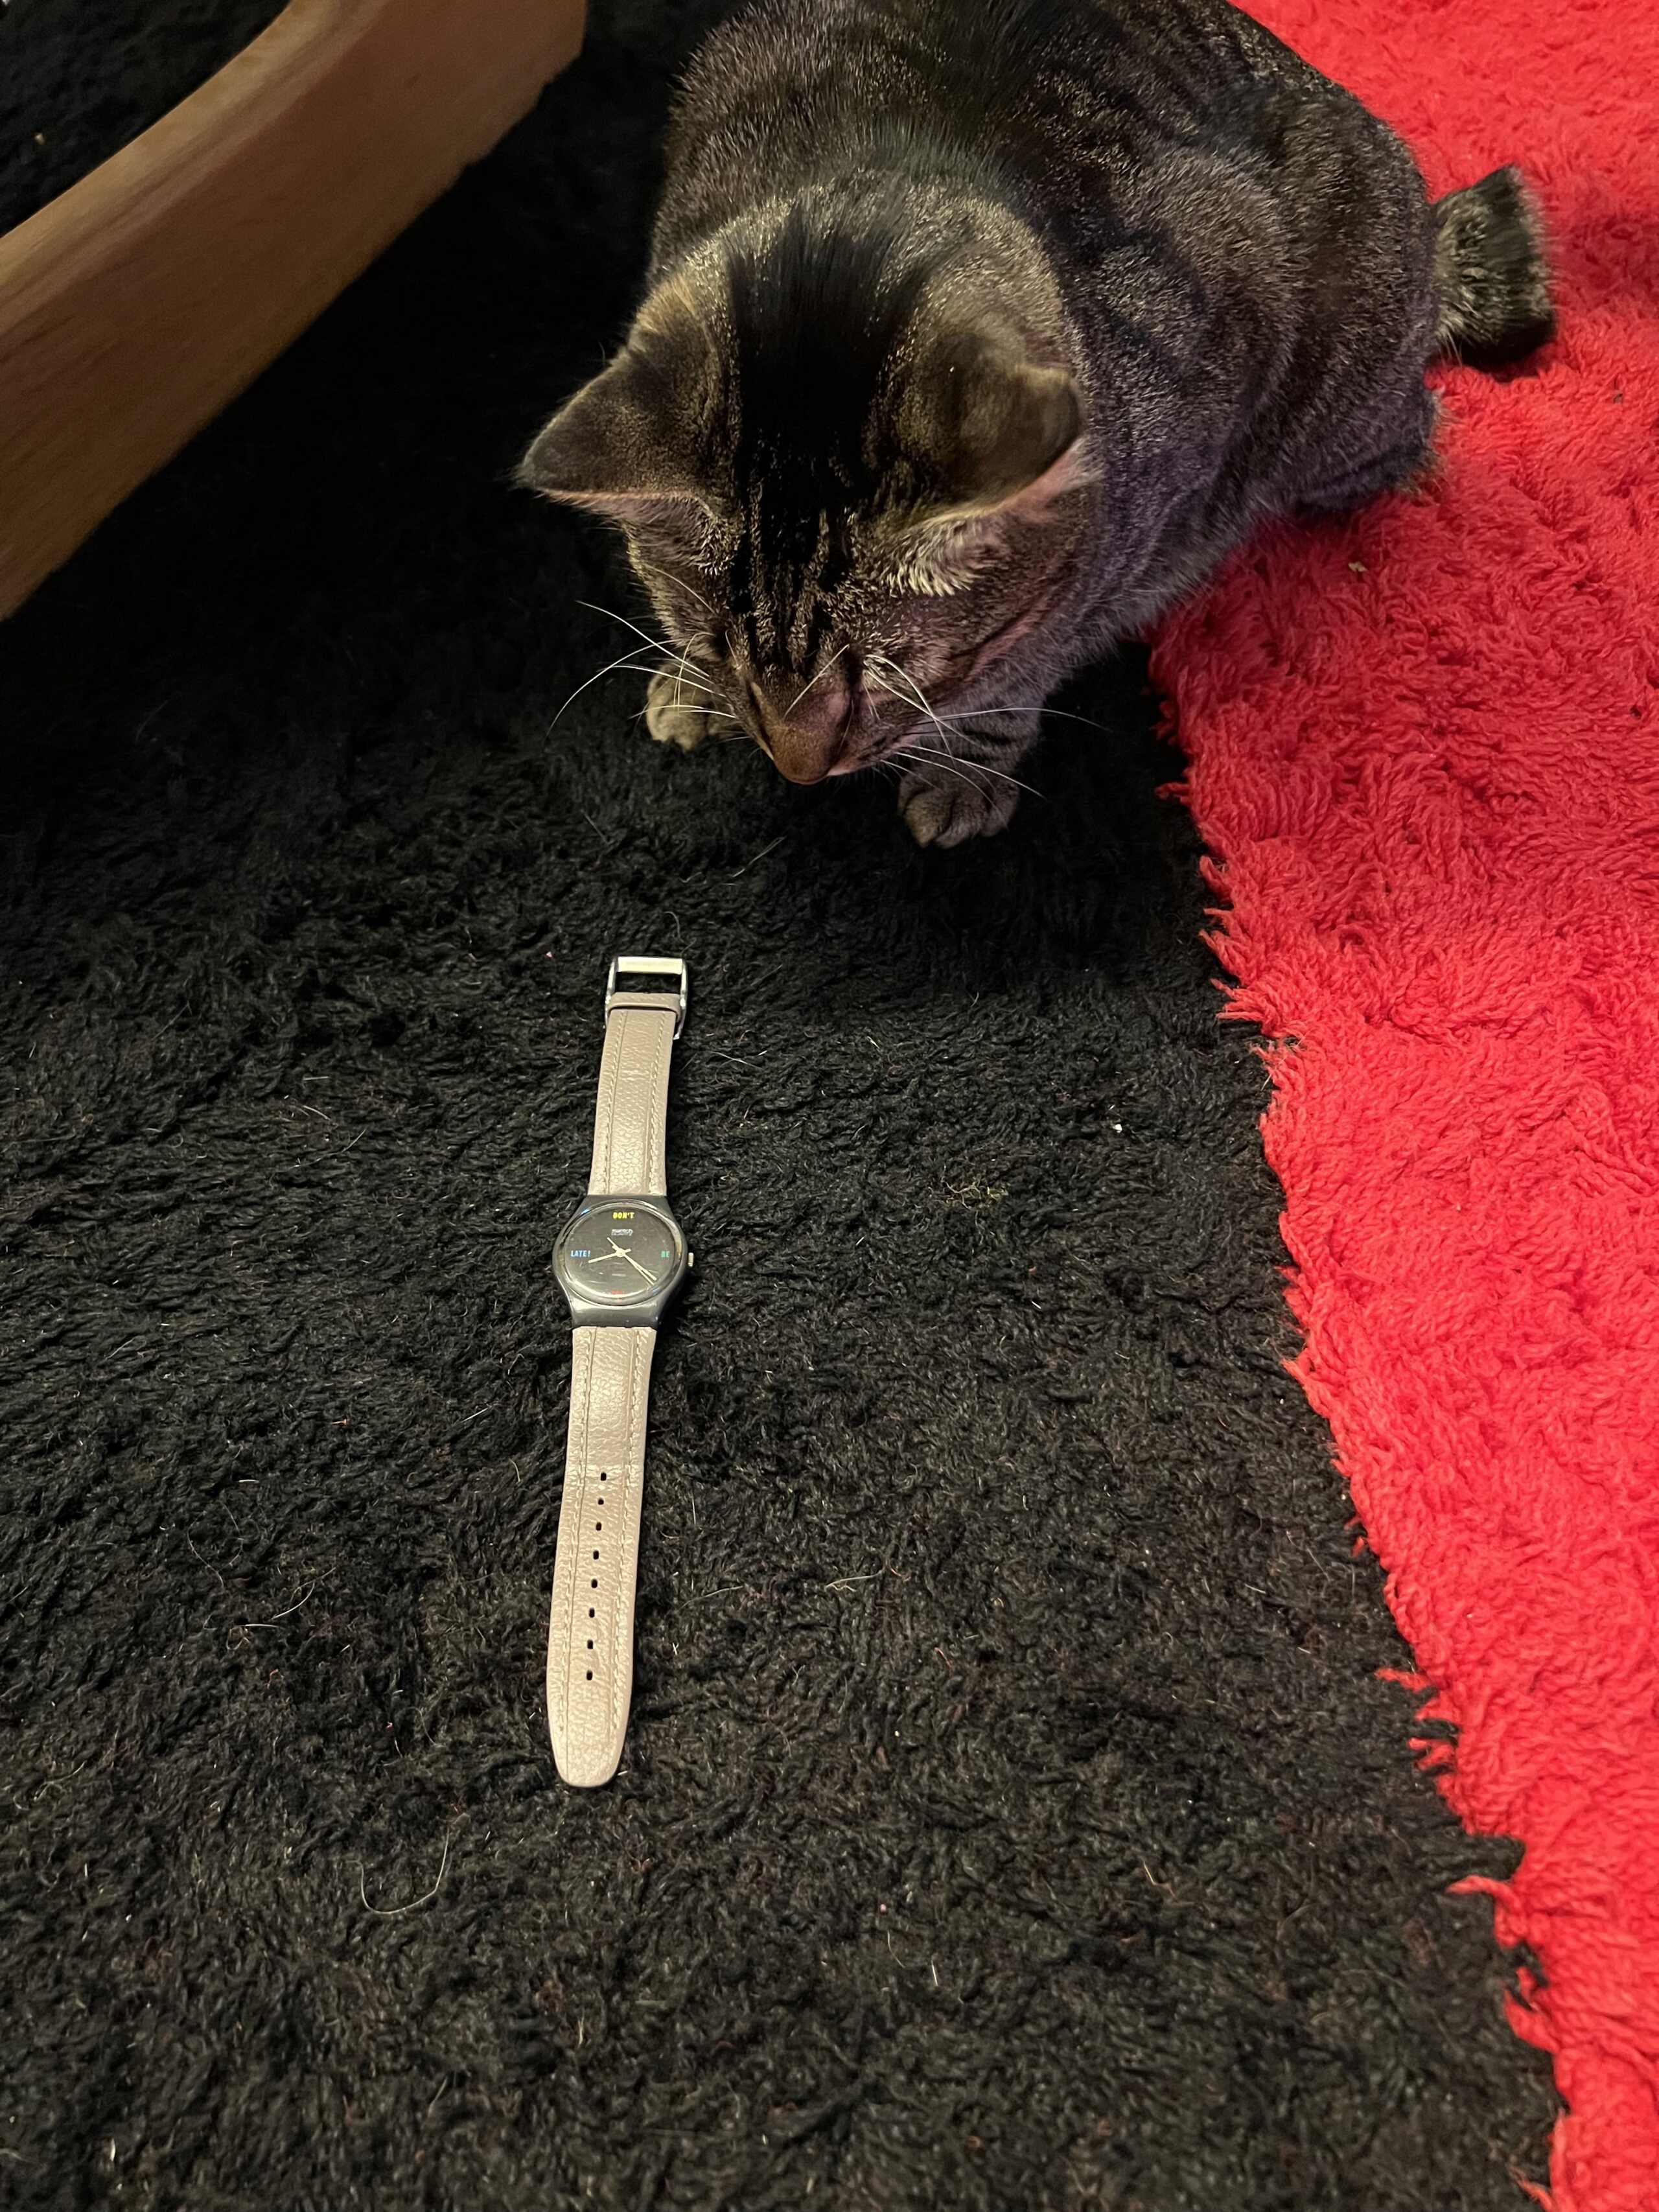 SWATCH, Vraiment jetable? - Page 2 Img_5614